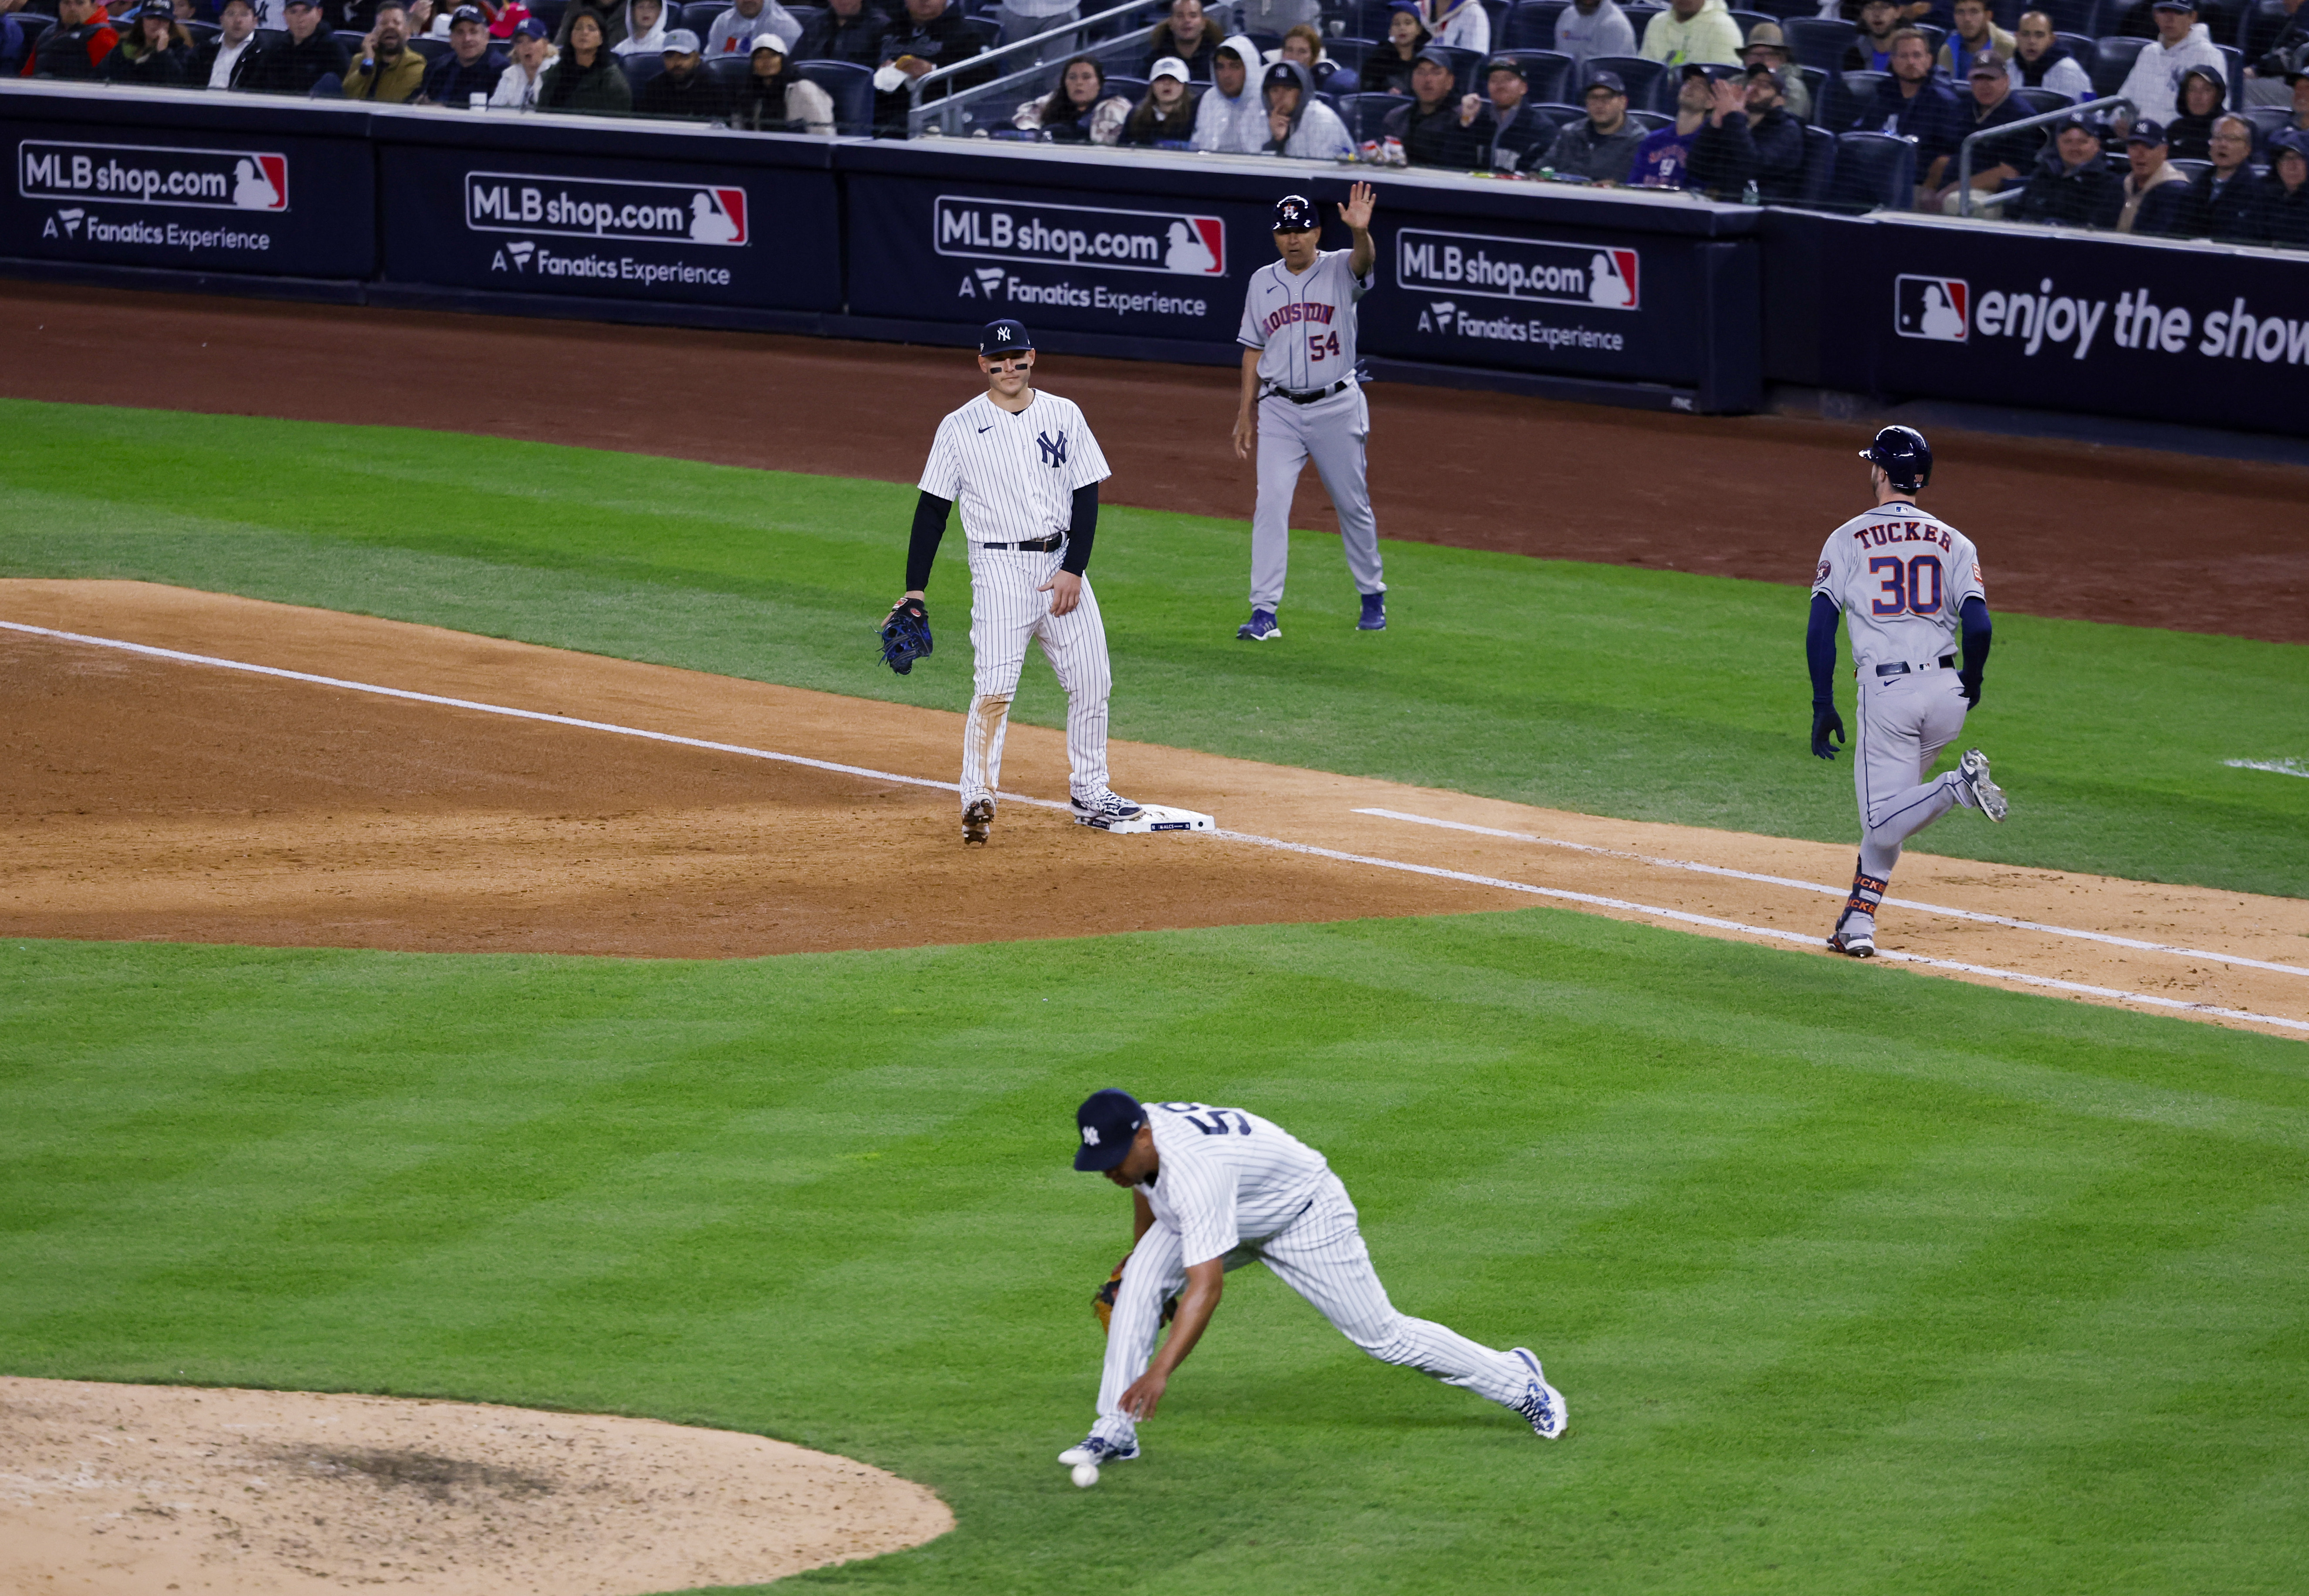 Choke! Yankees' season on brink after they blow 2-run lead in 9th and lose  to Guardians 